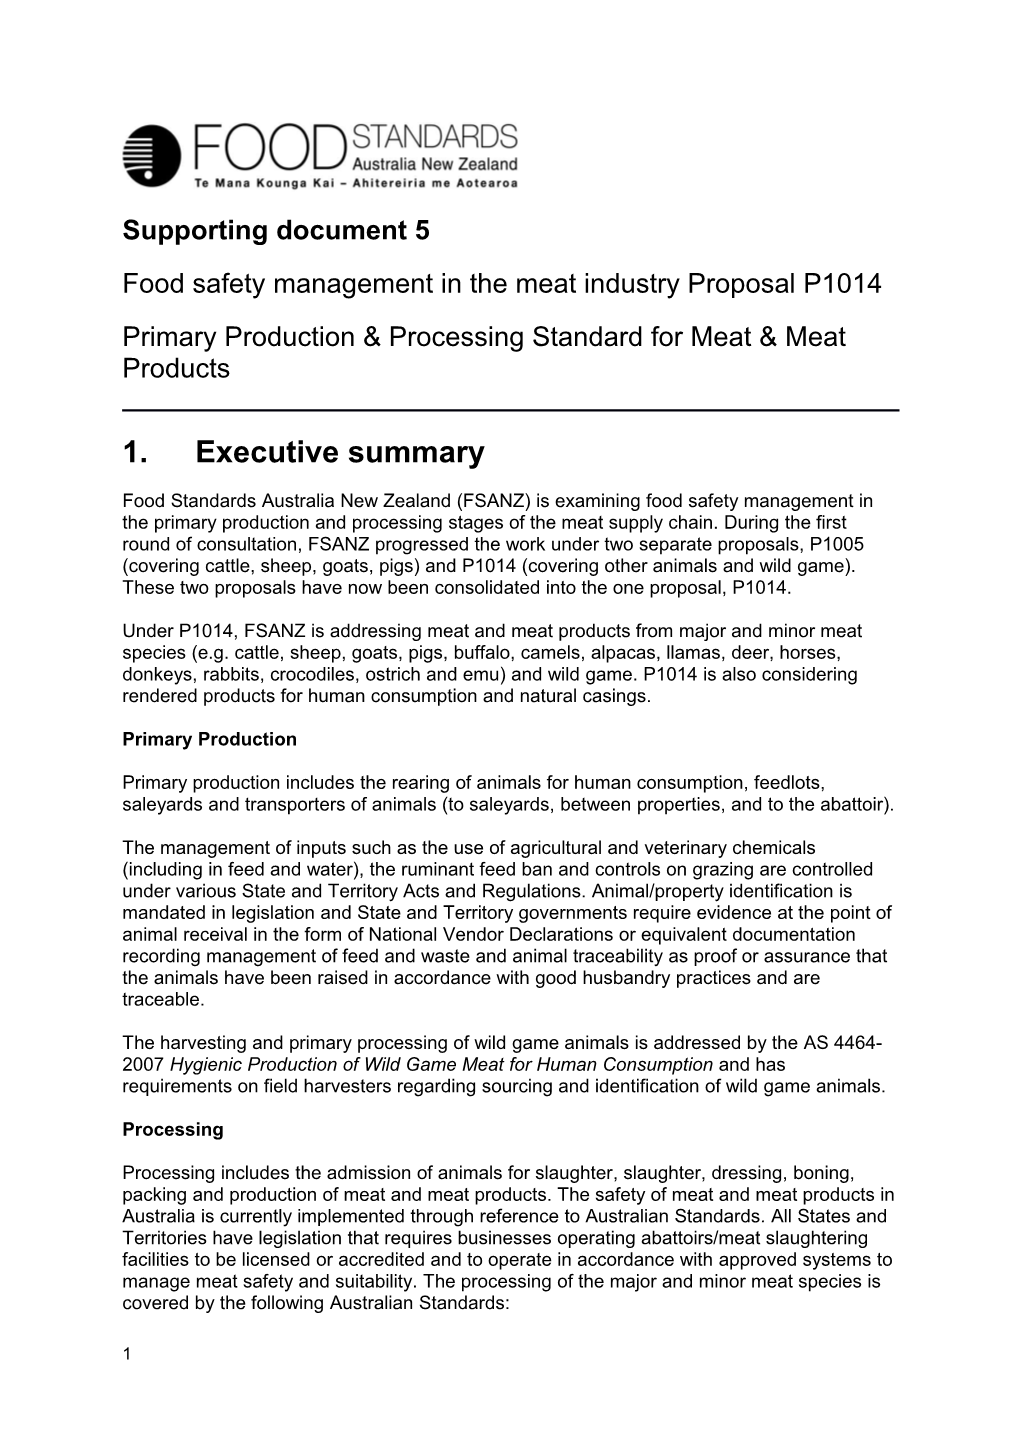 Food Safety Management in the Meat Industry Proposal P1014